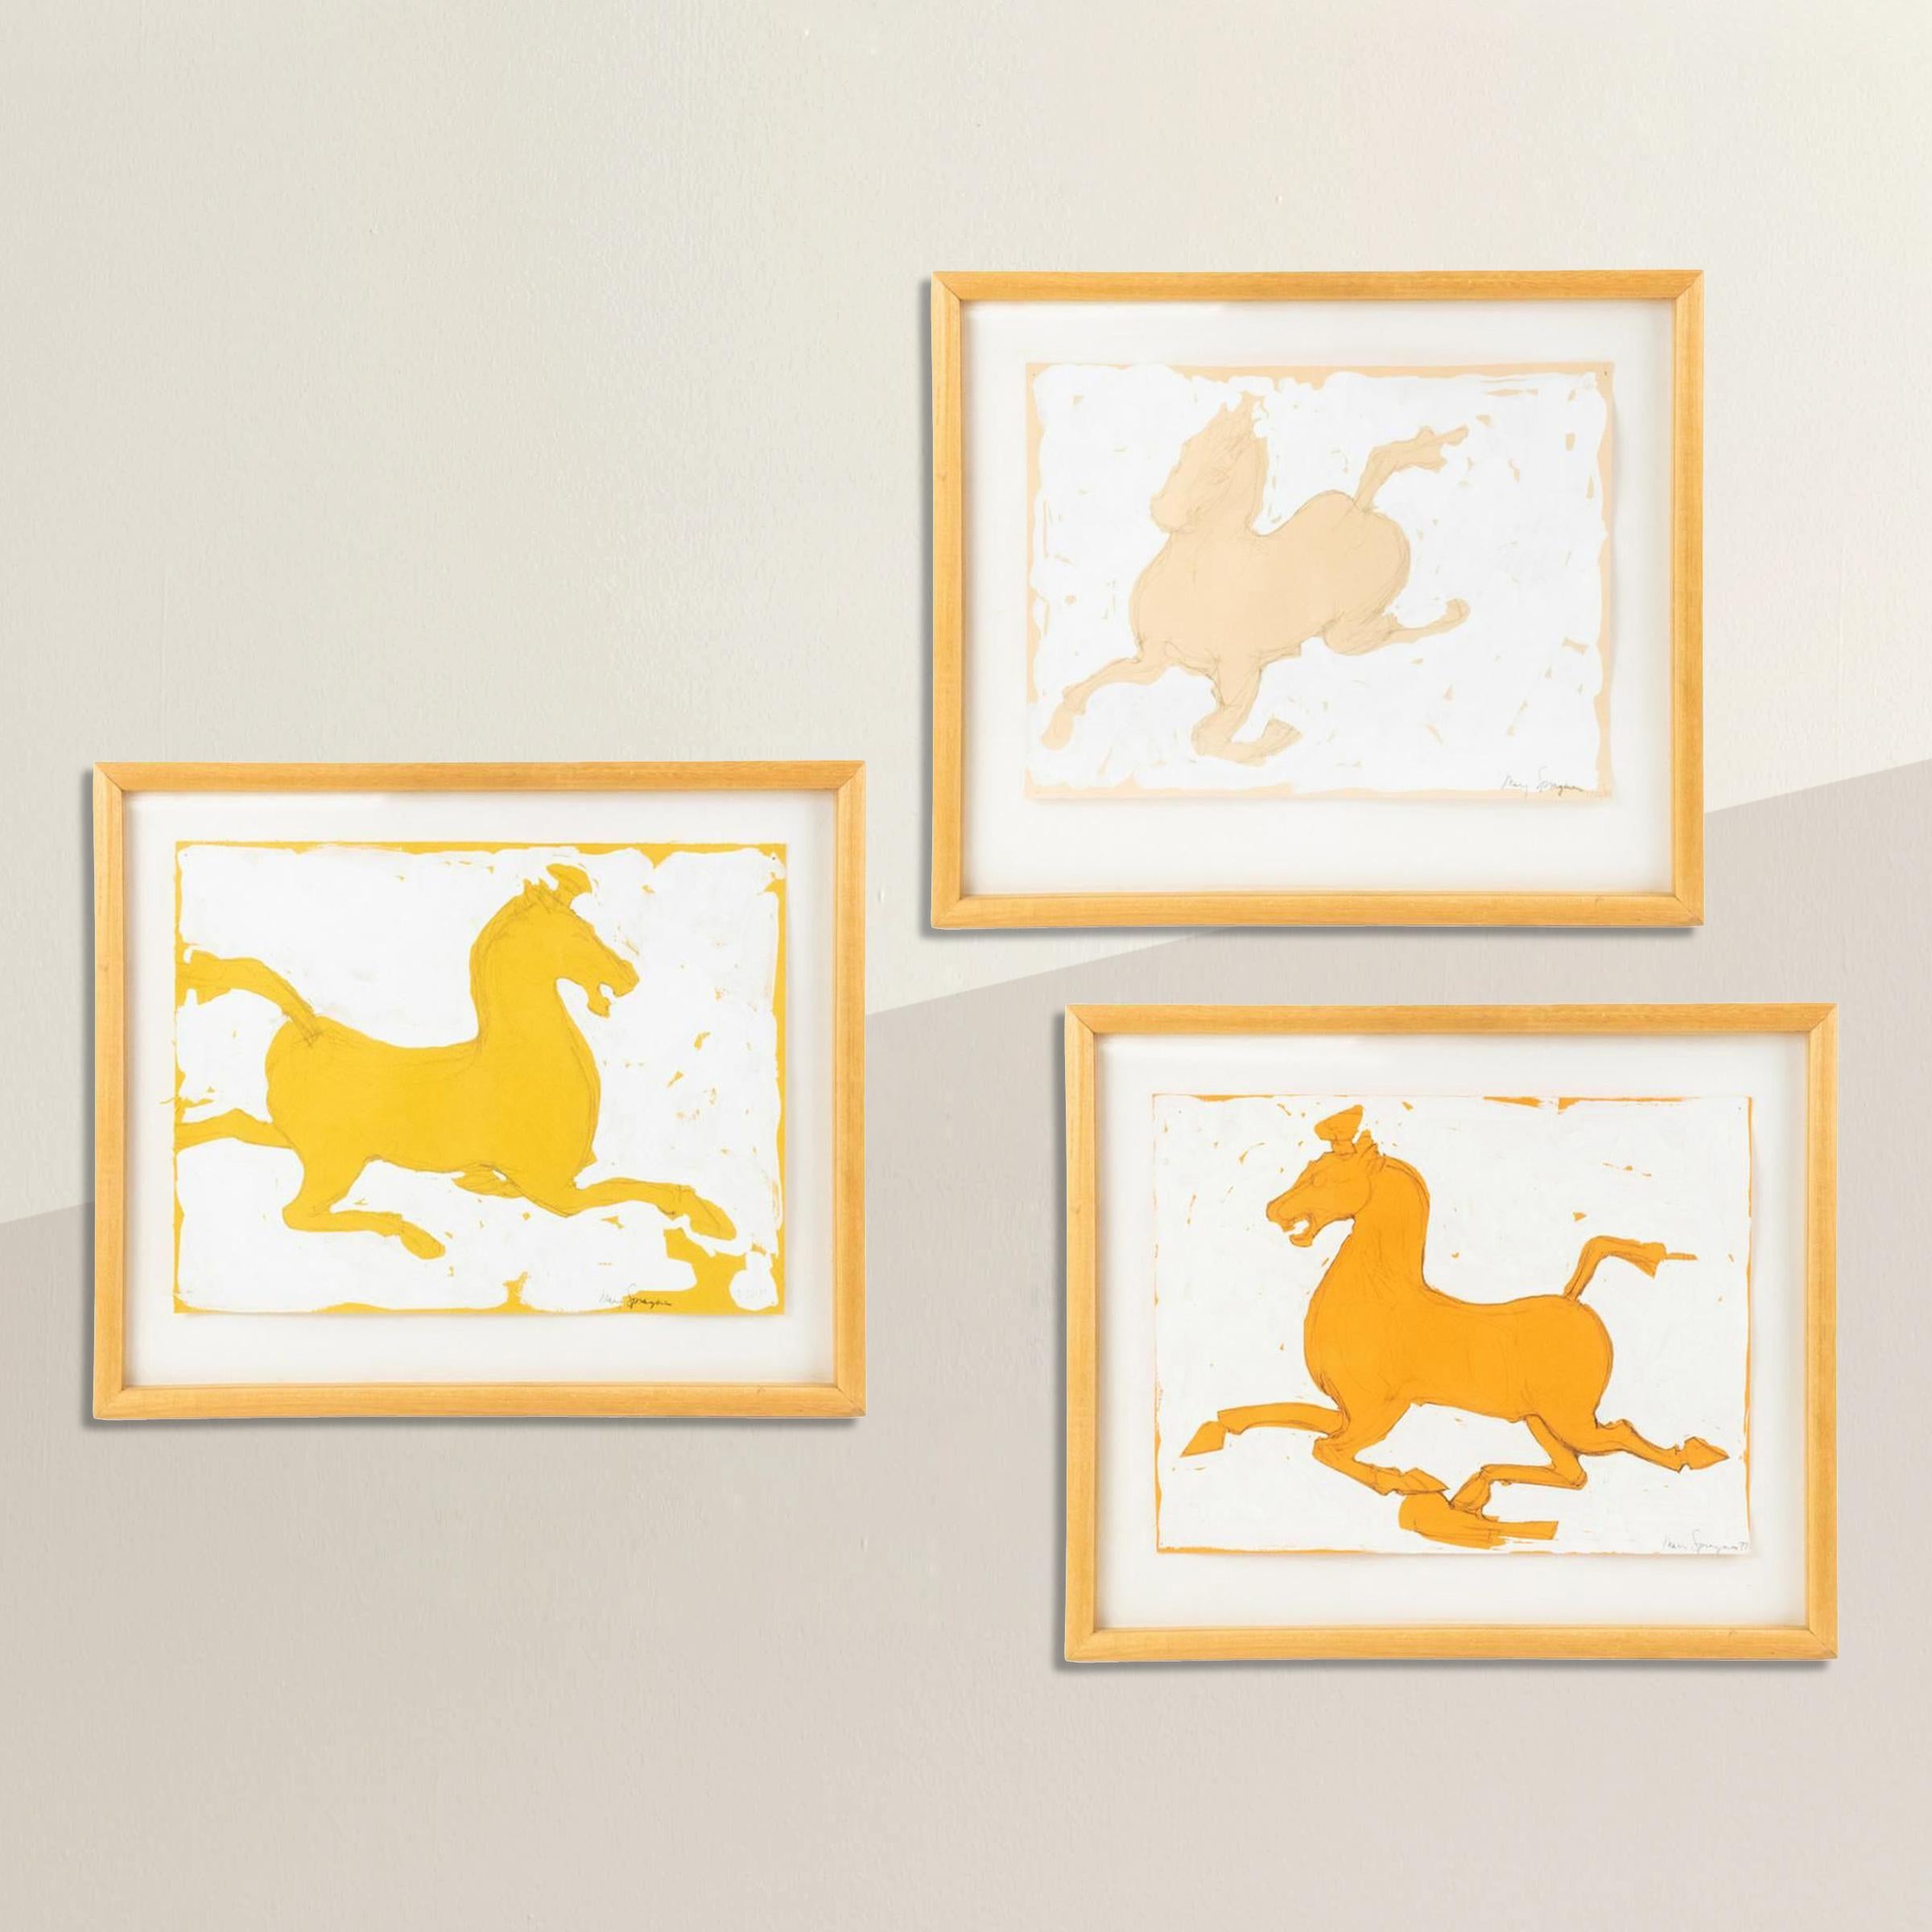 A set of three playful horse paintings by Mary Sprague, dated 1988. Each painting is rendered in graphite and white paint against yellow and orange papers, and floated in simple maple gallery frames and under glass.